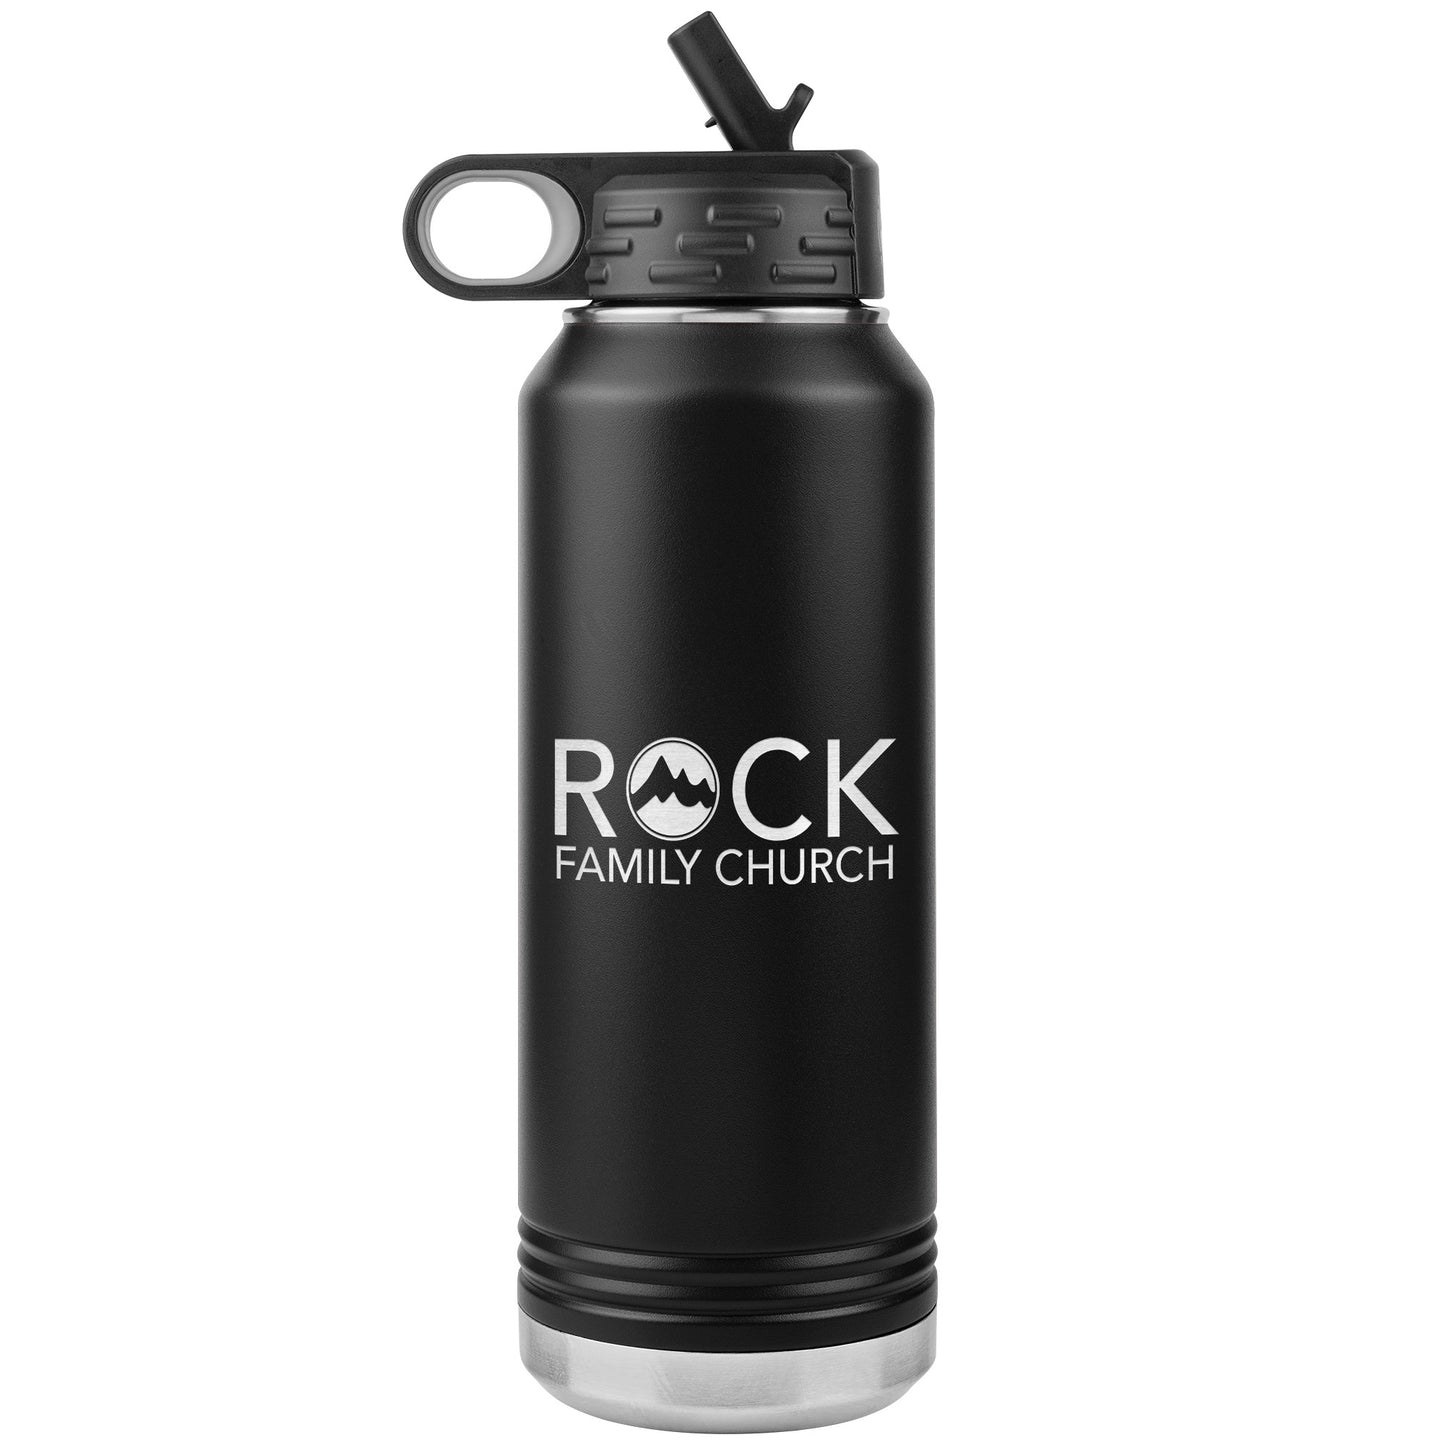 Rock Family Church Insulated Water Bottle